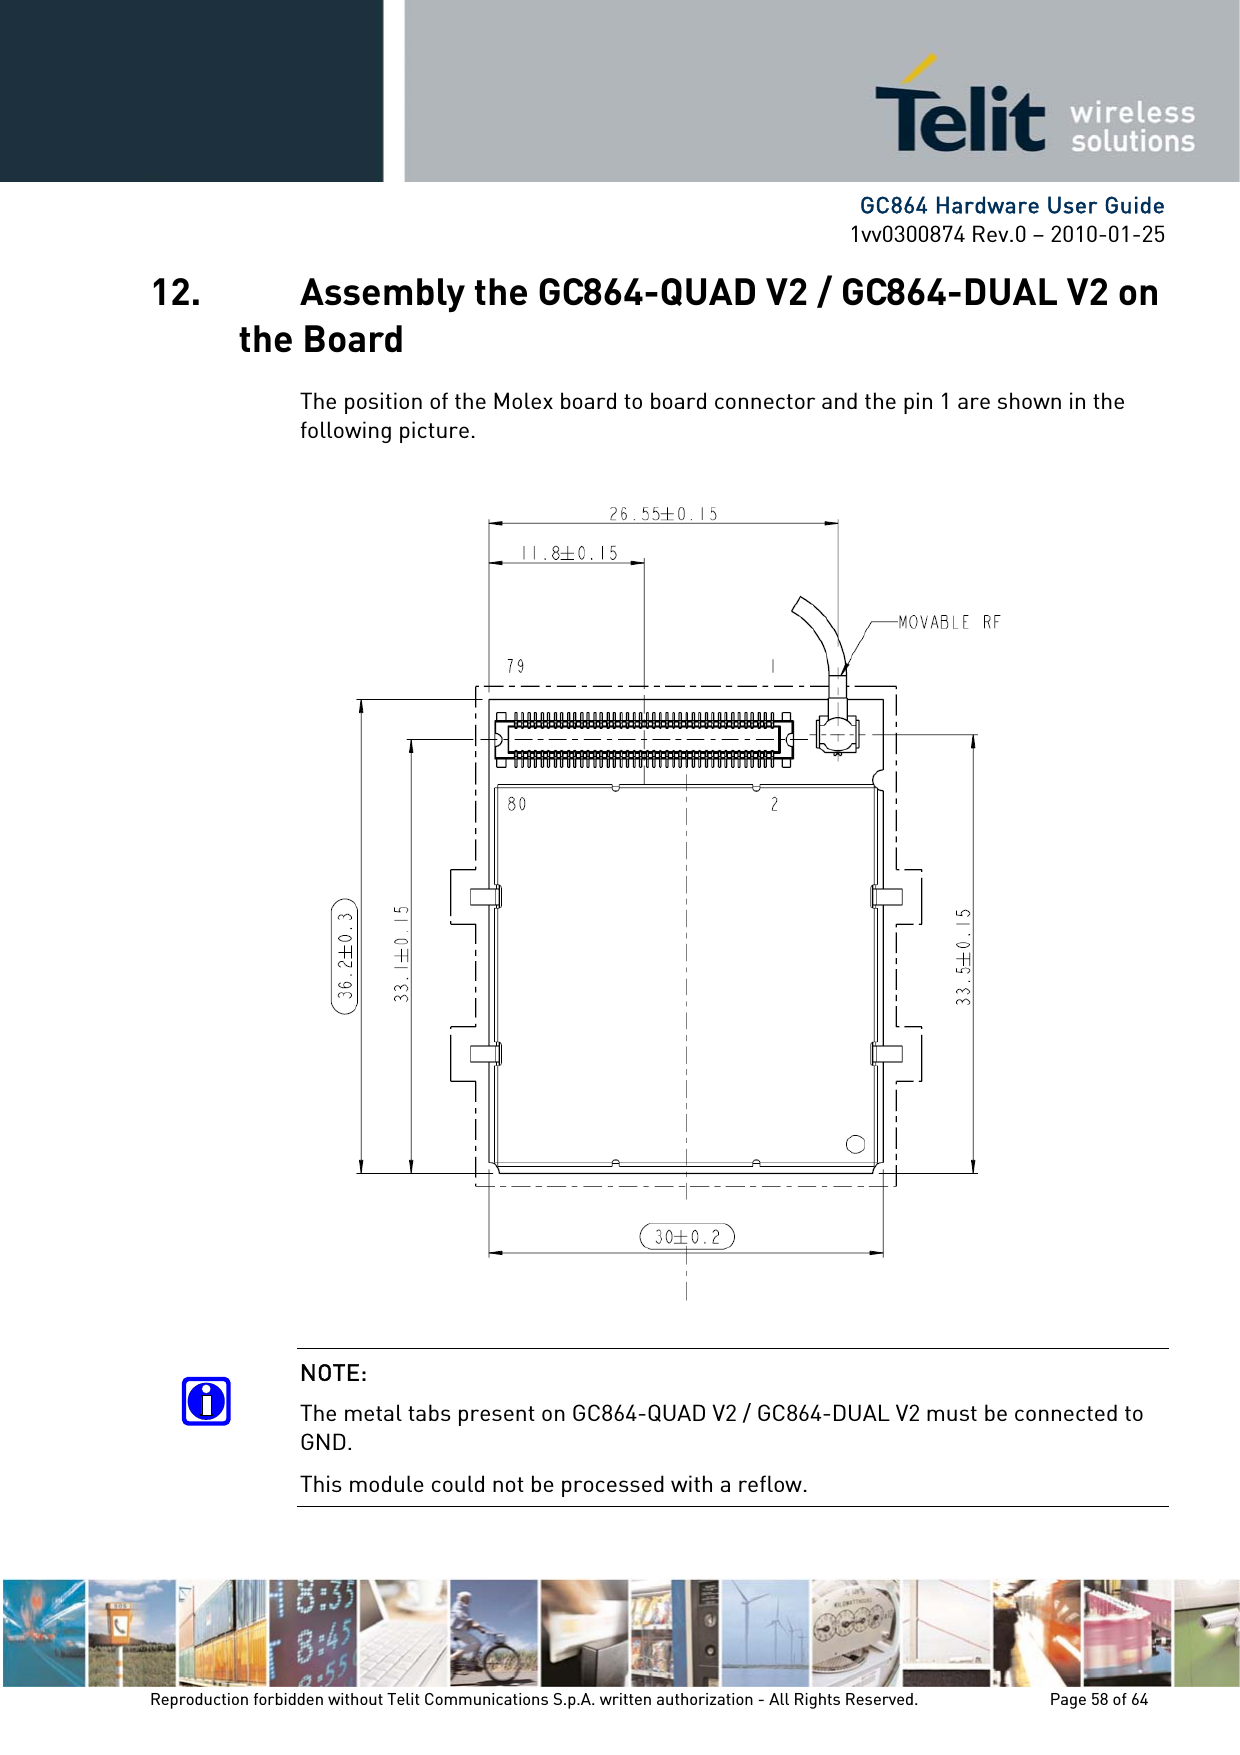      GC864 Hardware User Guide 1vv0300874 Rev.0 – 2010-01-25 Reproduction forbidden without Telit Communications S.p.A. written authorization - All Rights Reserved.    Page 58 of 64  12. Assembly the GC864-QUAD V2 / GC864-DUAL V2 on the Board The position of the Molex board to board connector and the pin 1 are shown in the following picture.  NOTE: The metal tabs present on GC864-QUAD V2 / GC864-DUAL V2 must be connected to GND. This module could not be processed with a reflow. 